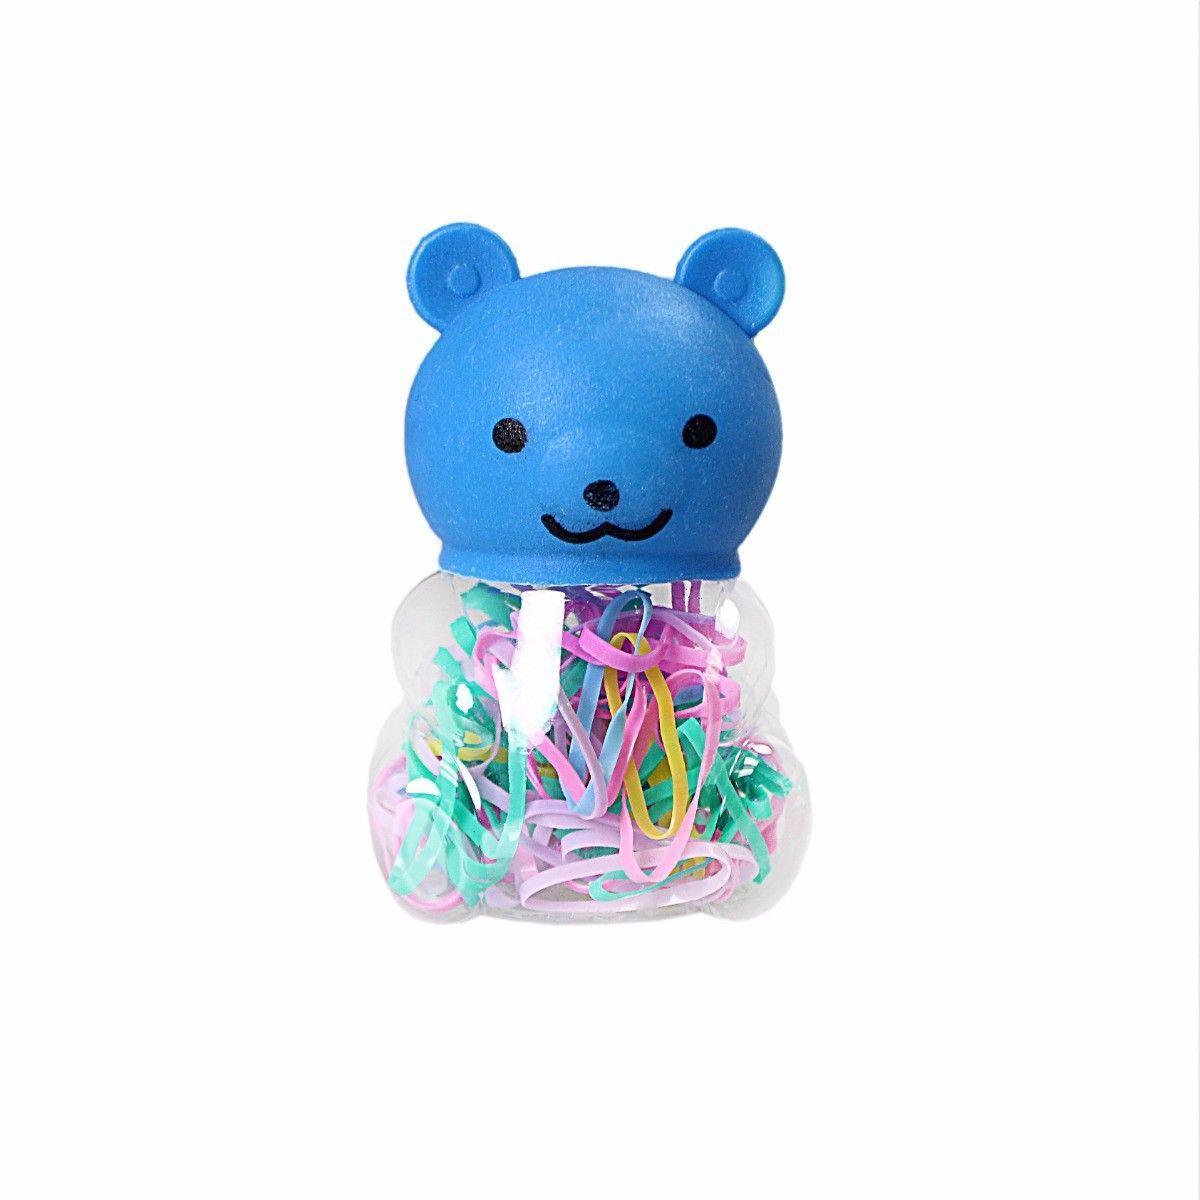 Assorted Colour Small Rubber Bands In Teddy Shaped Box Approx 50   3241 (Large Letter Rate)